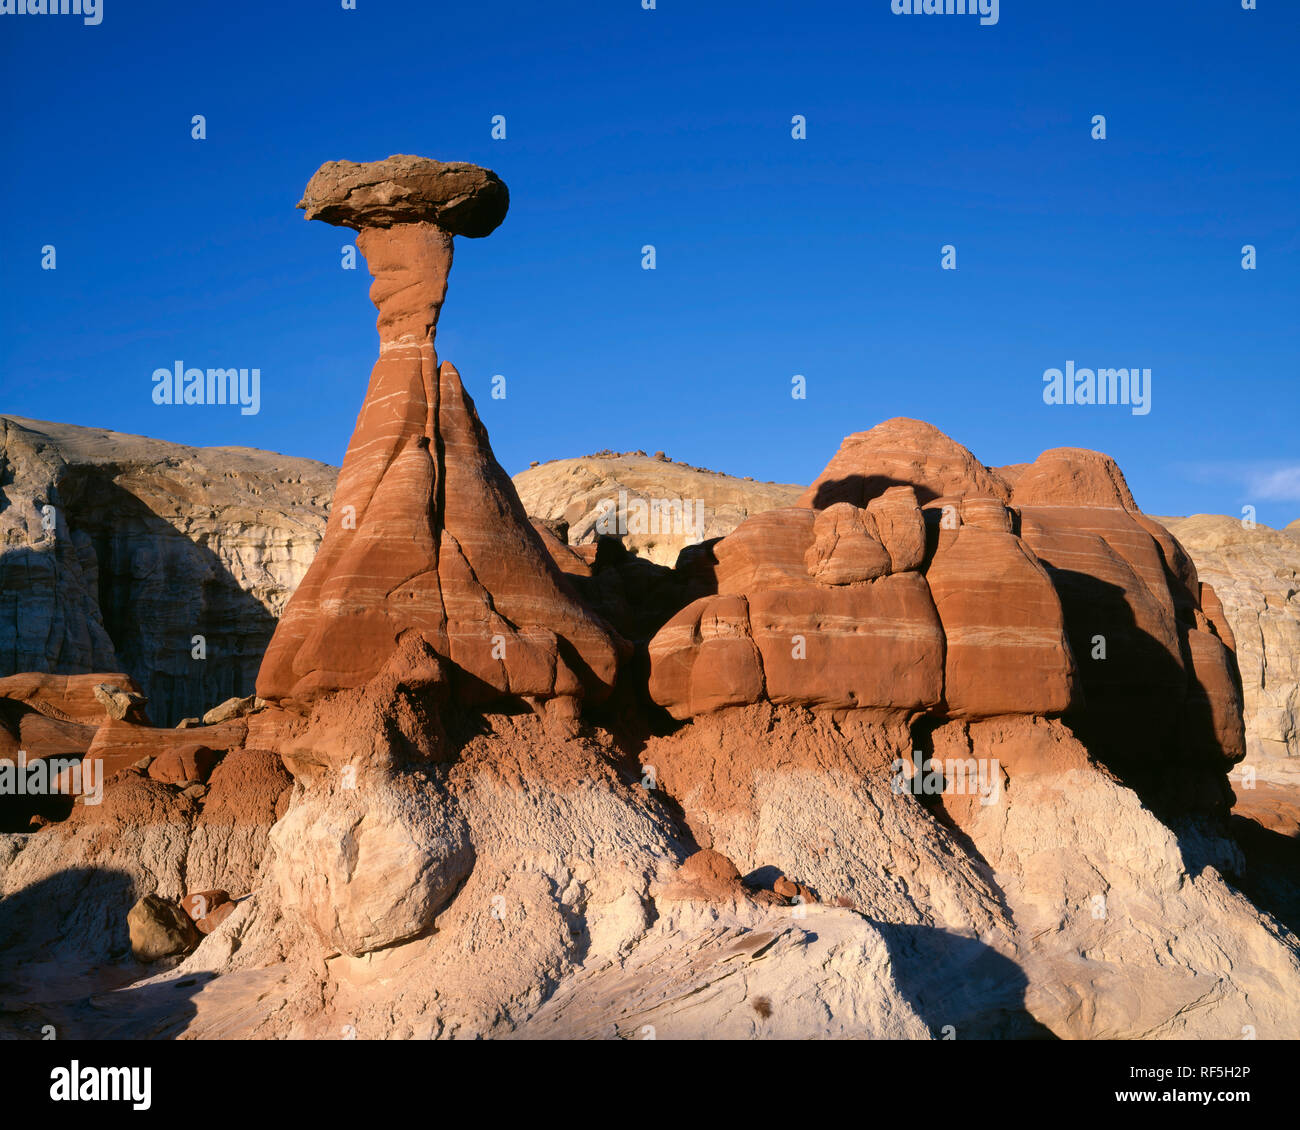 USA, Utah, Grand Staircase Escalante National Monument, The Toadstools are soft sandstone pedestals which have eroded more quickly than their hard cap Stock Photo